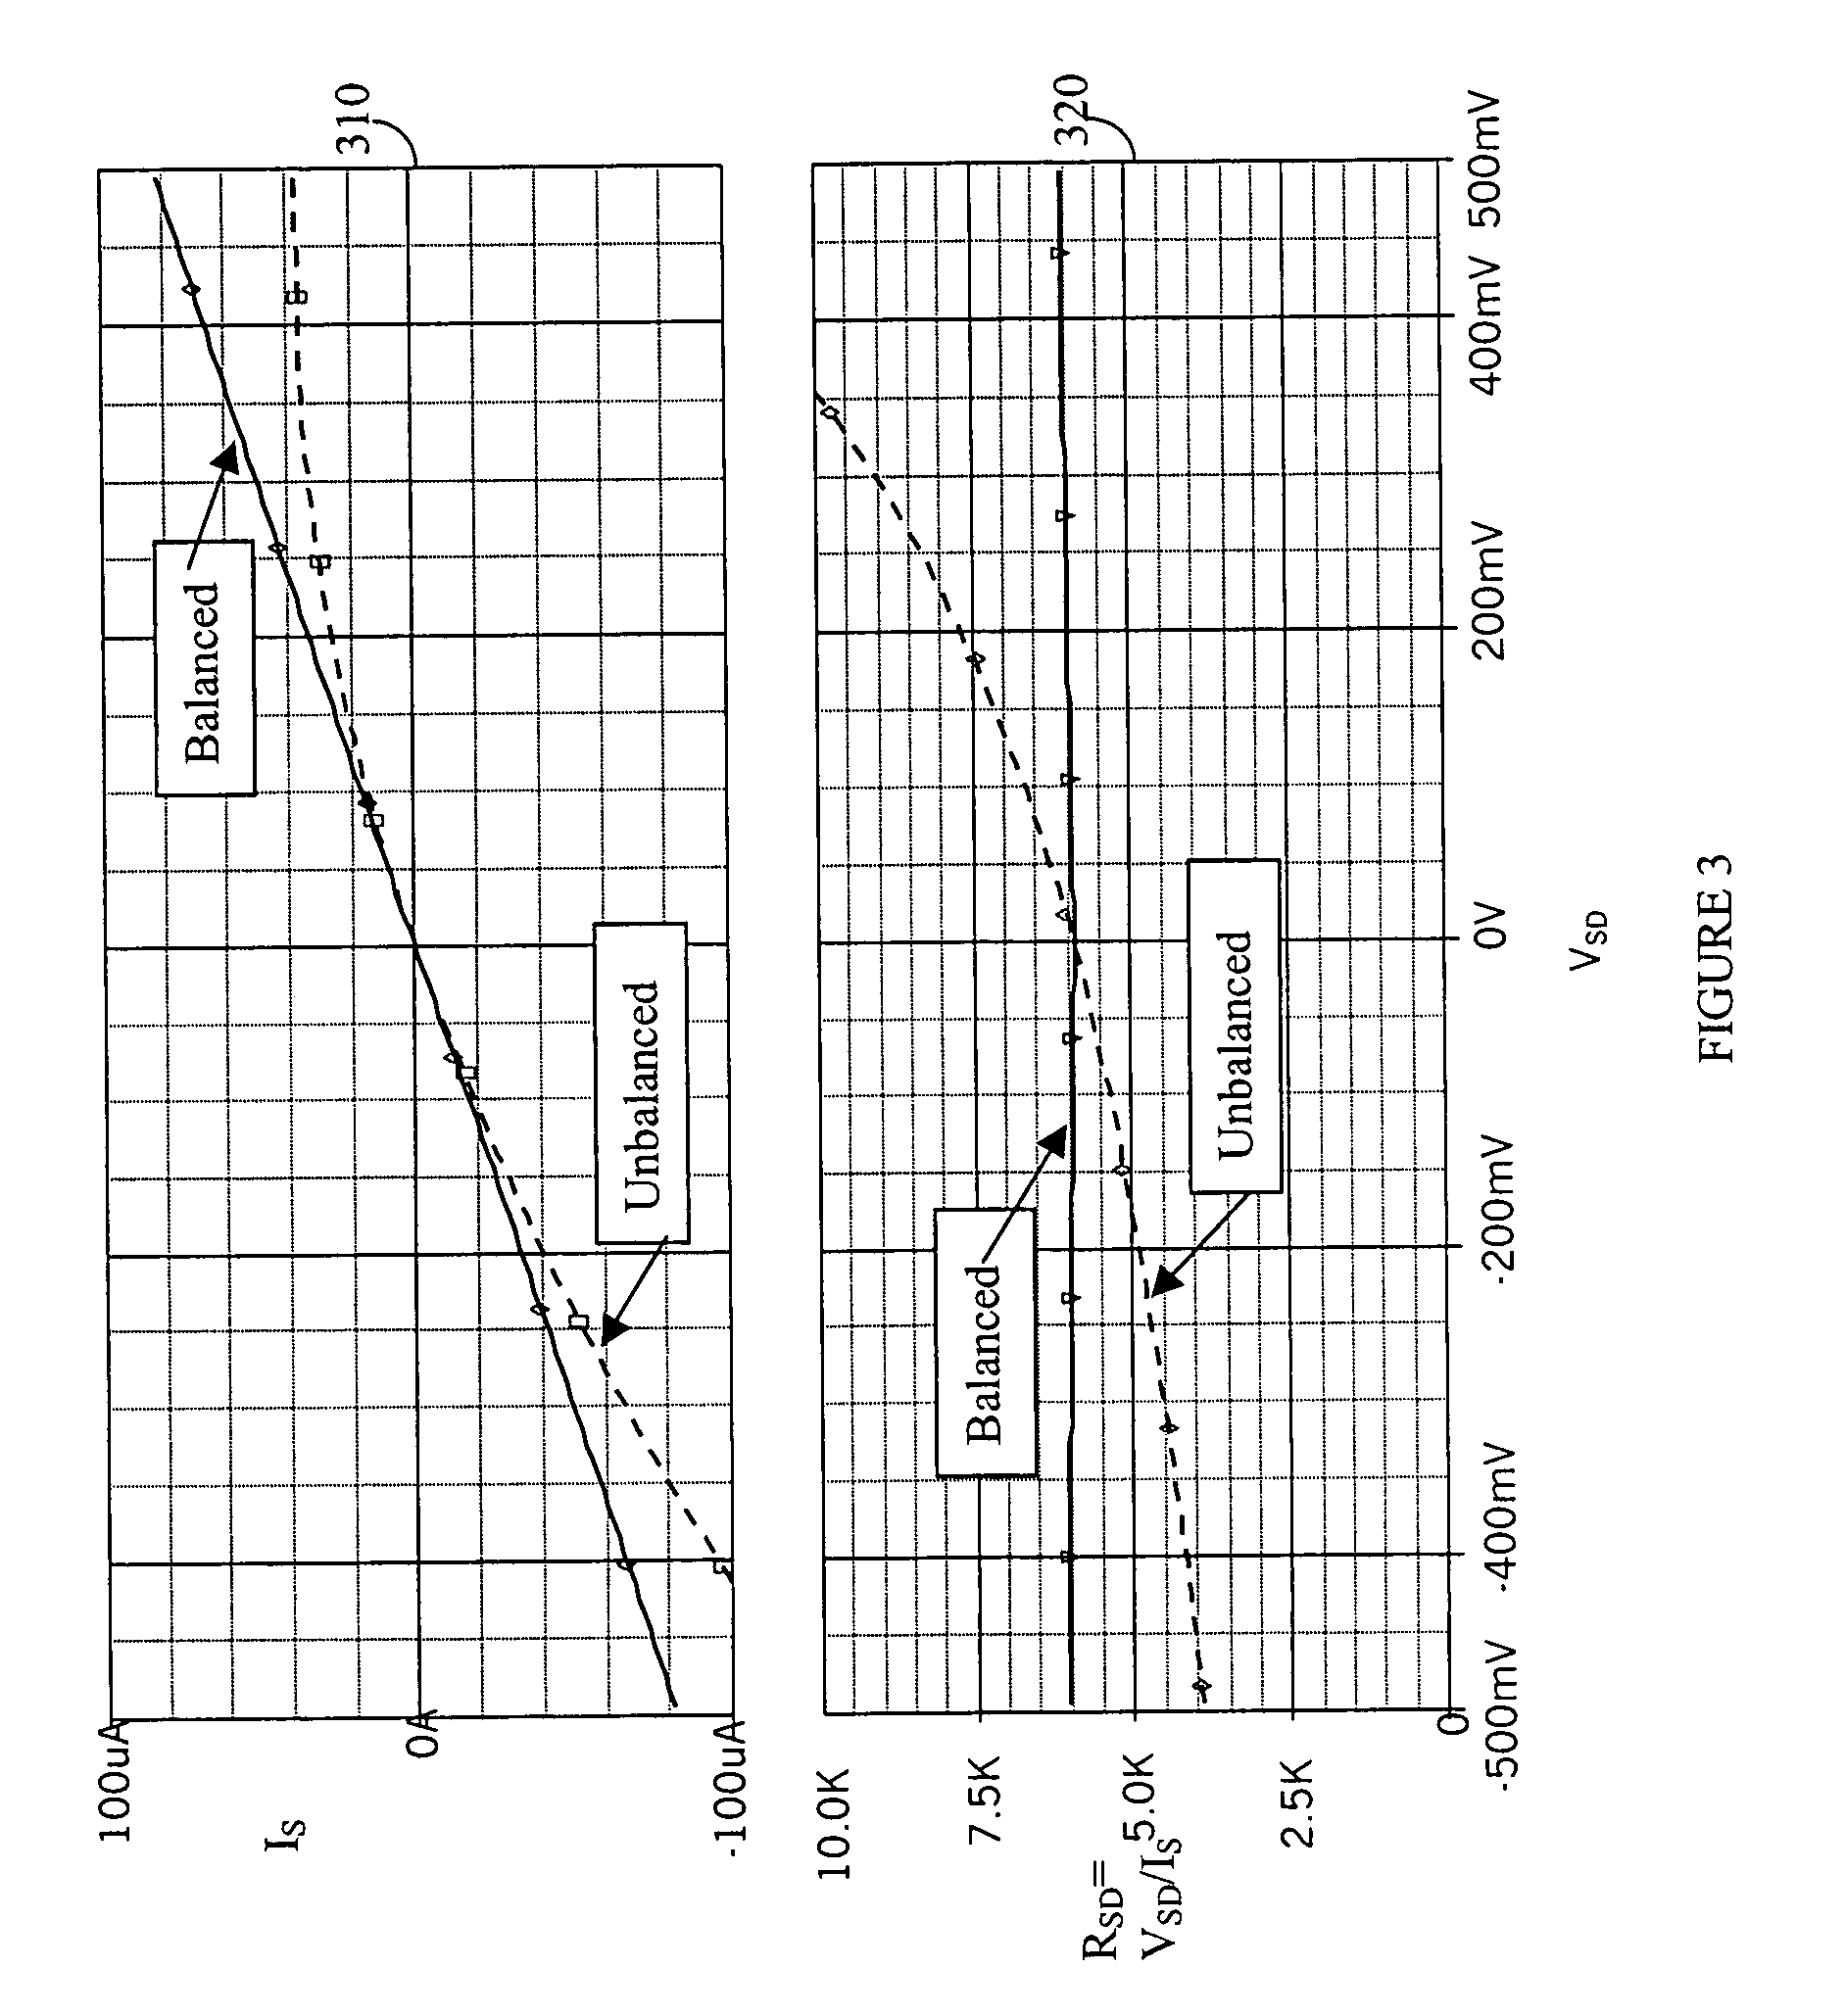 One-pin automatic tuning of MOSFET resistors